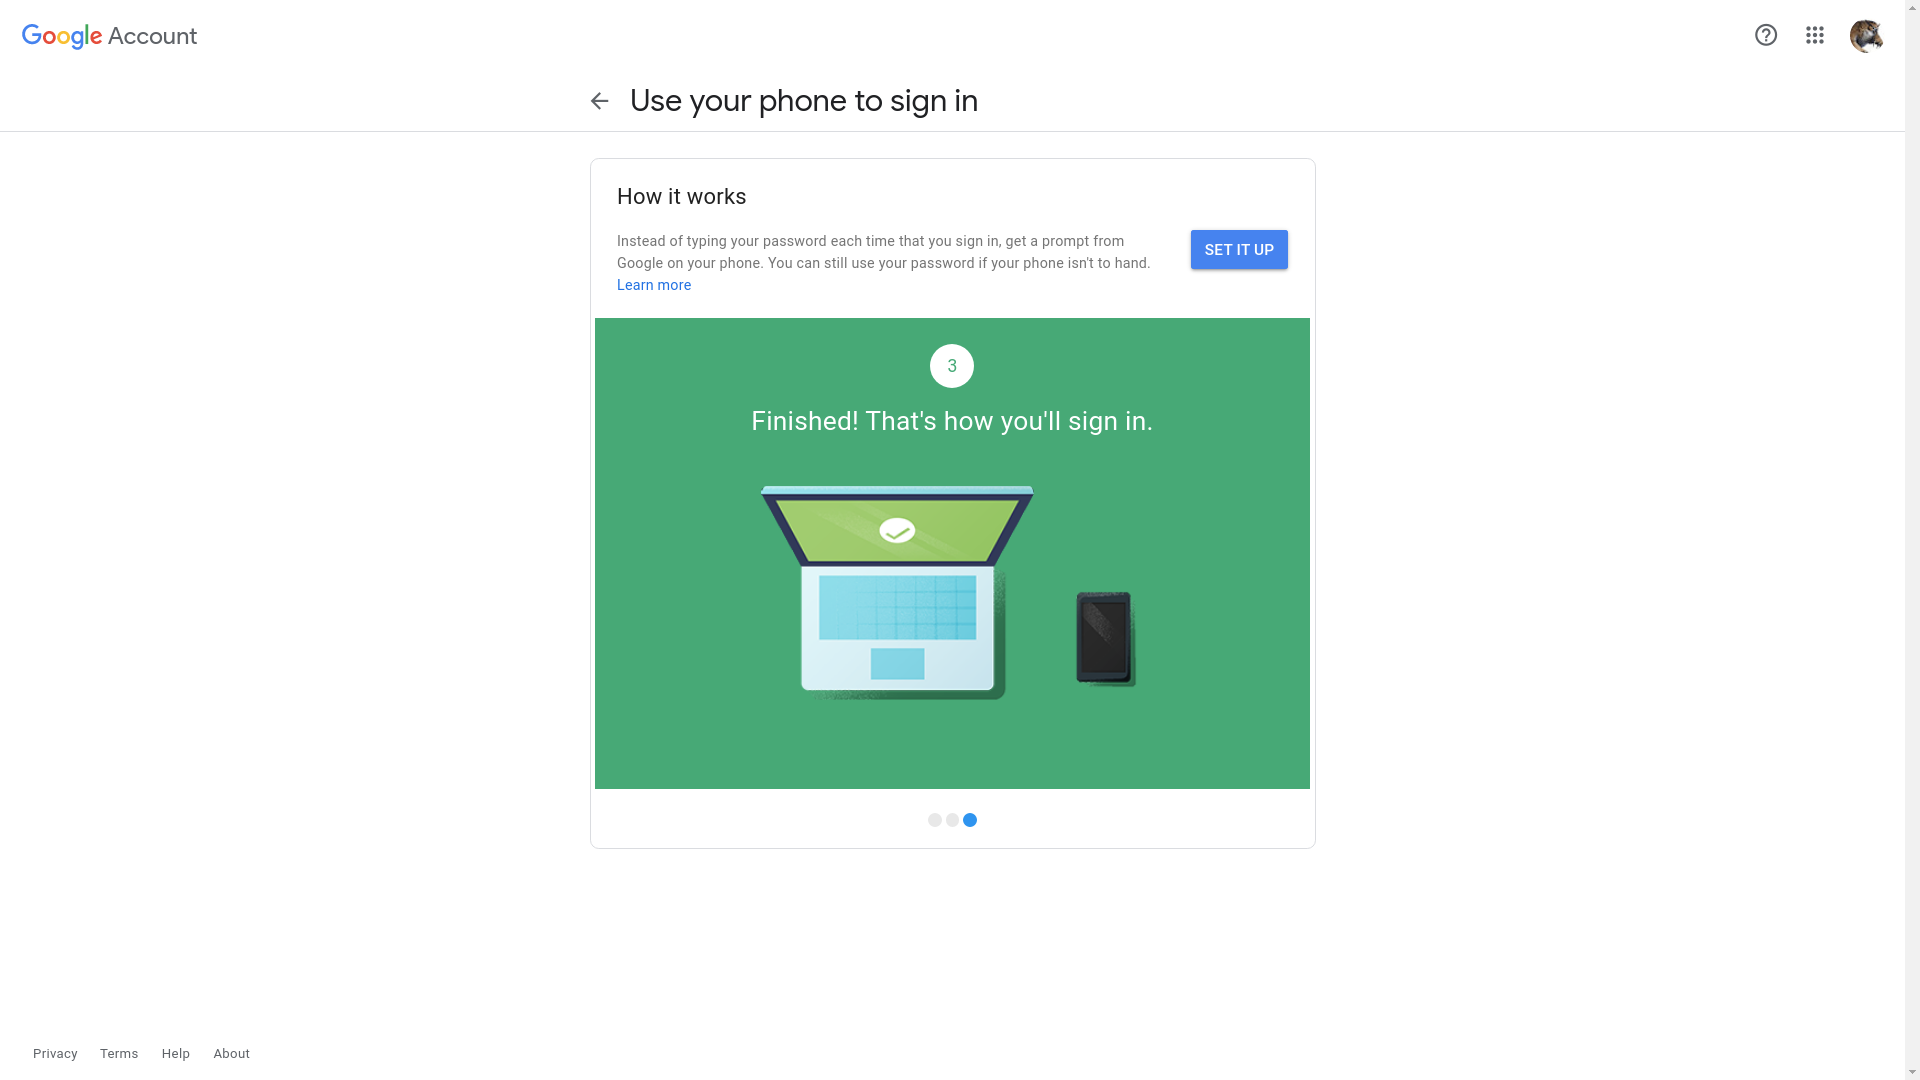 Google explains passwordless login and invites you to begin setting it up